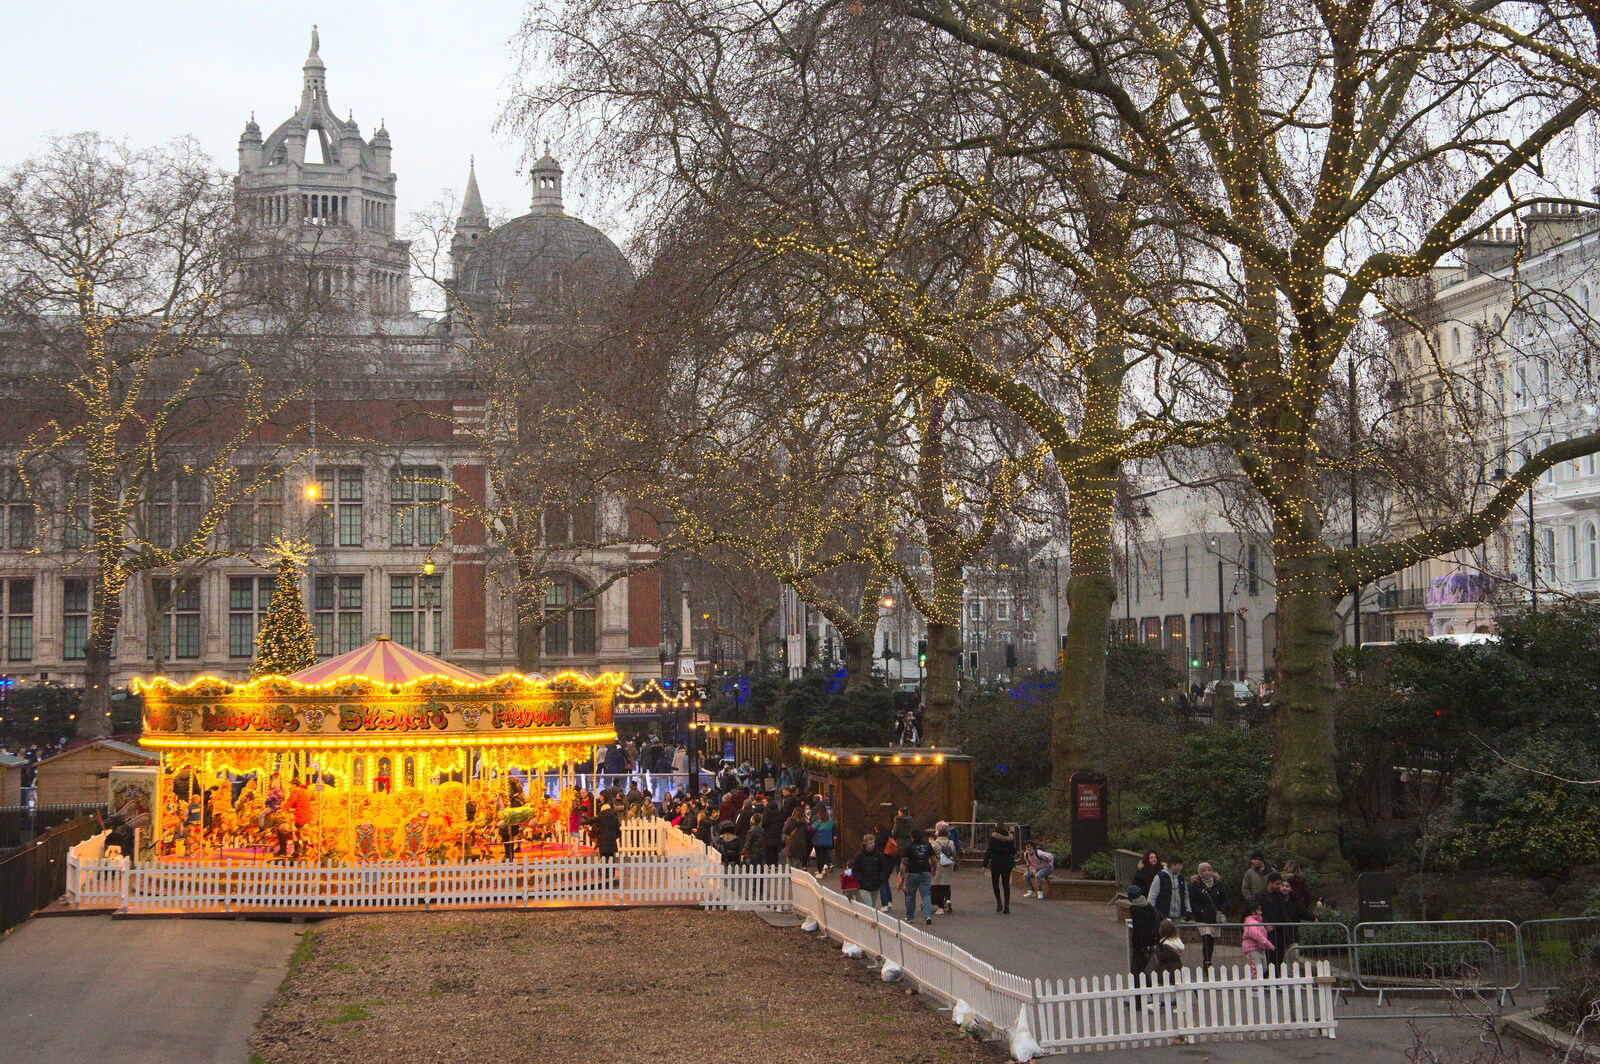 A view of the carousel from A Trip to the Natural History Museum, Kensington, London - 15th January 2022